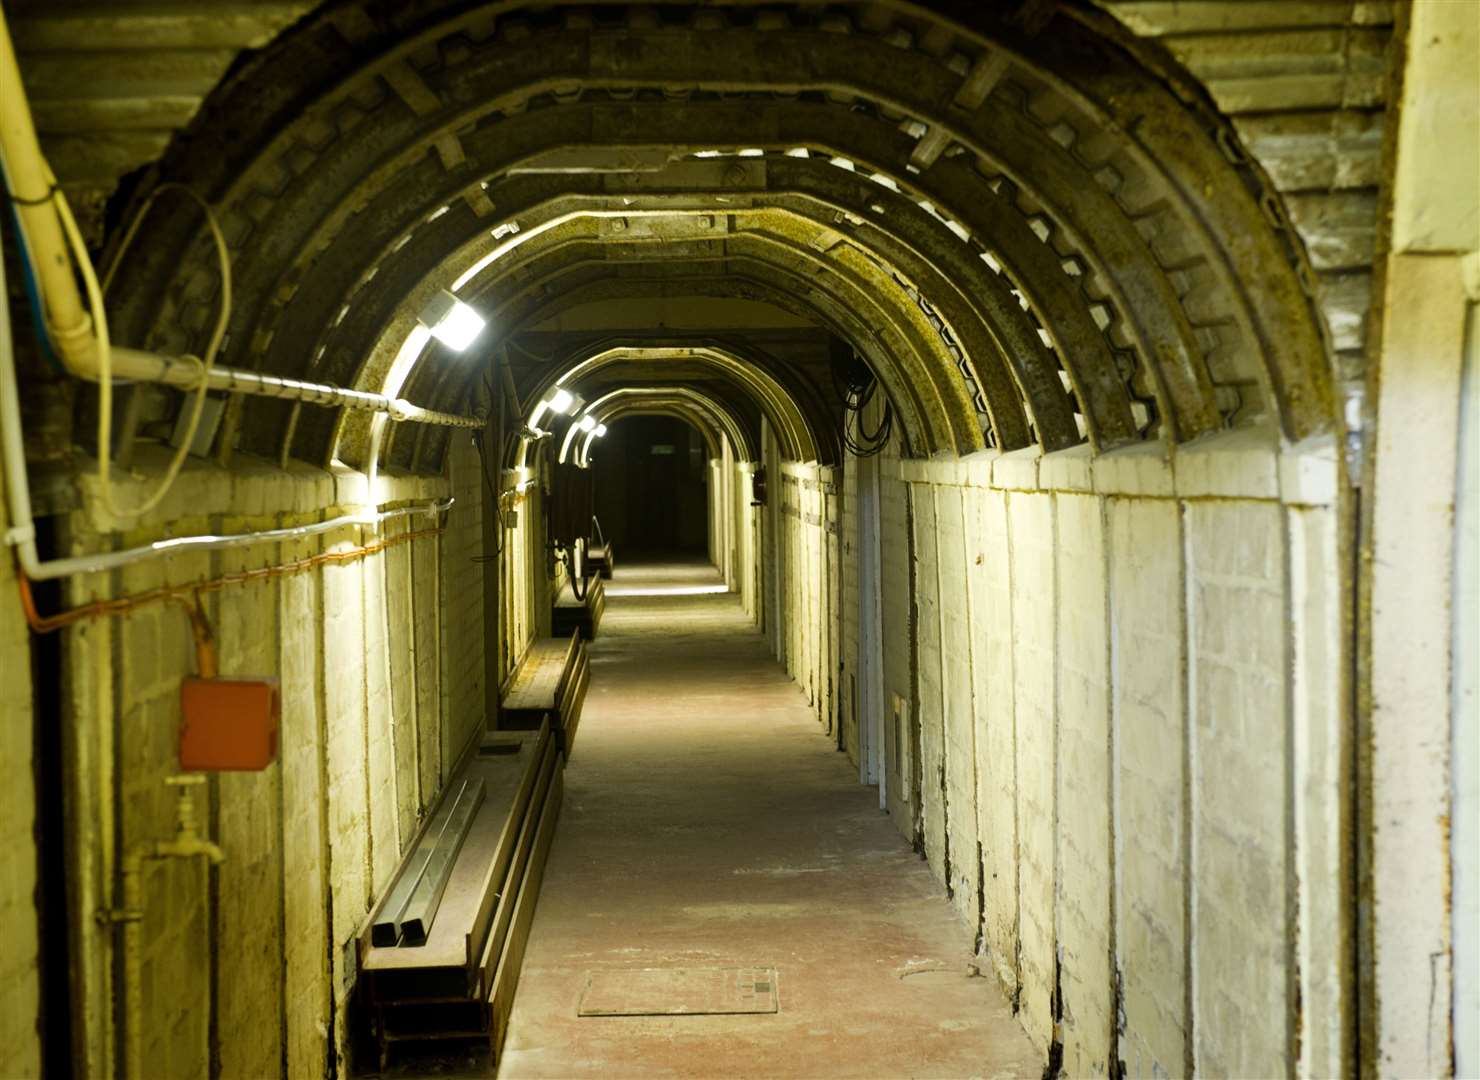 The Dumpy (Deep Underground Military Position Yellow) level below Dover Castle was used in the Cold War